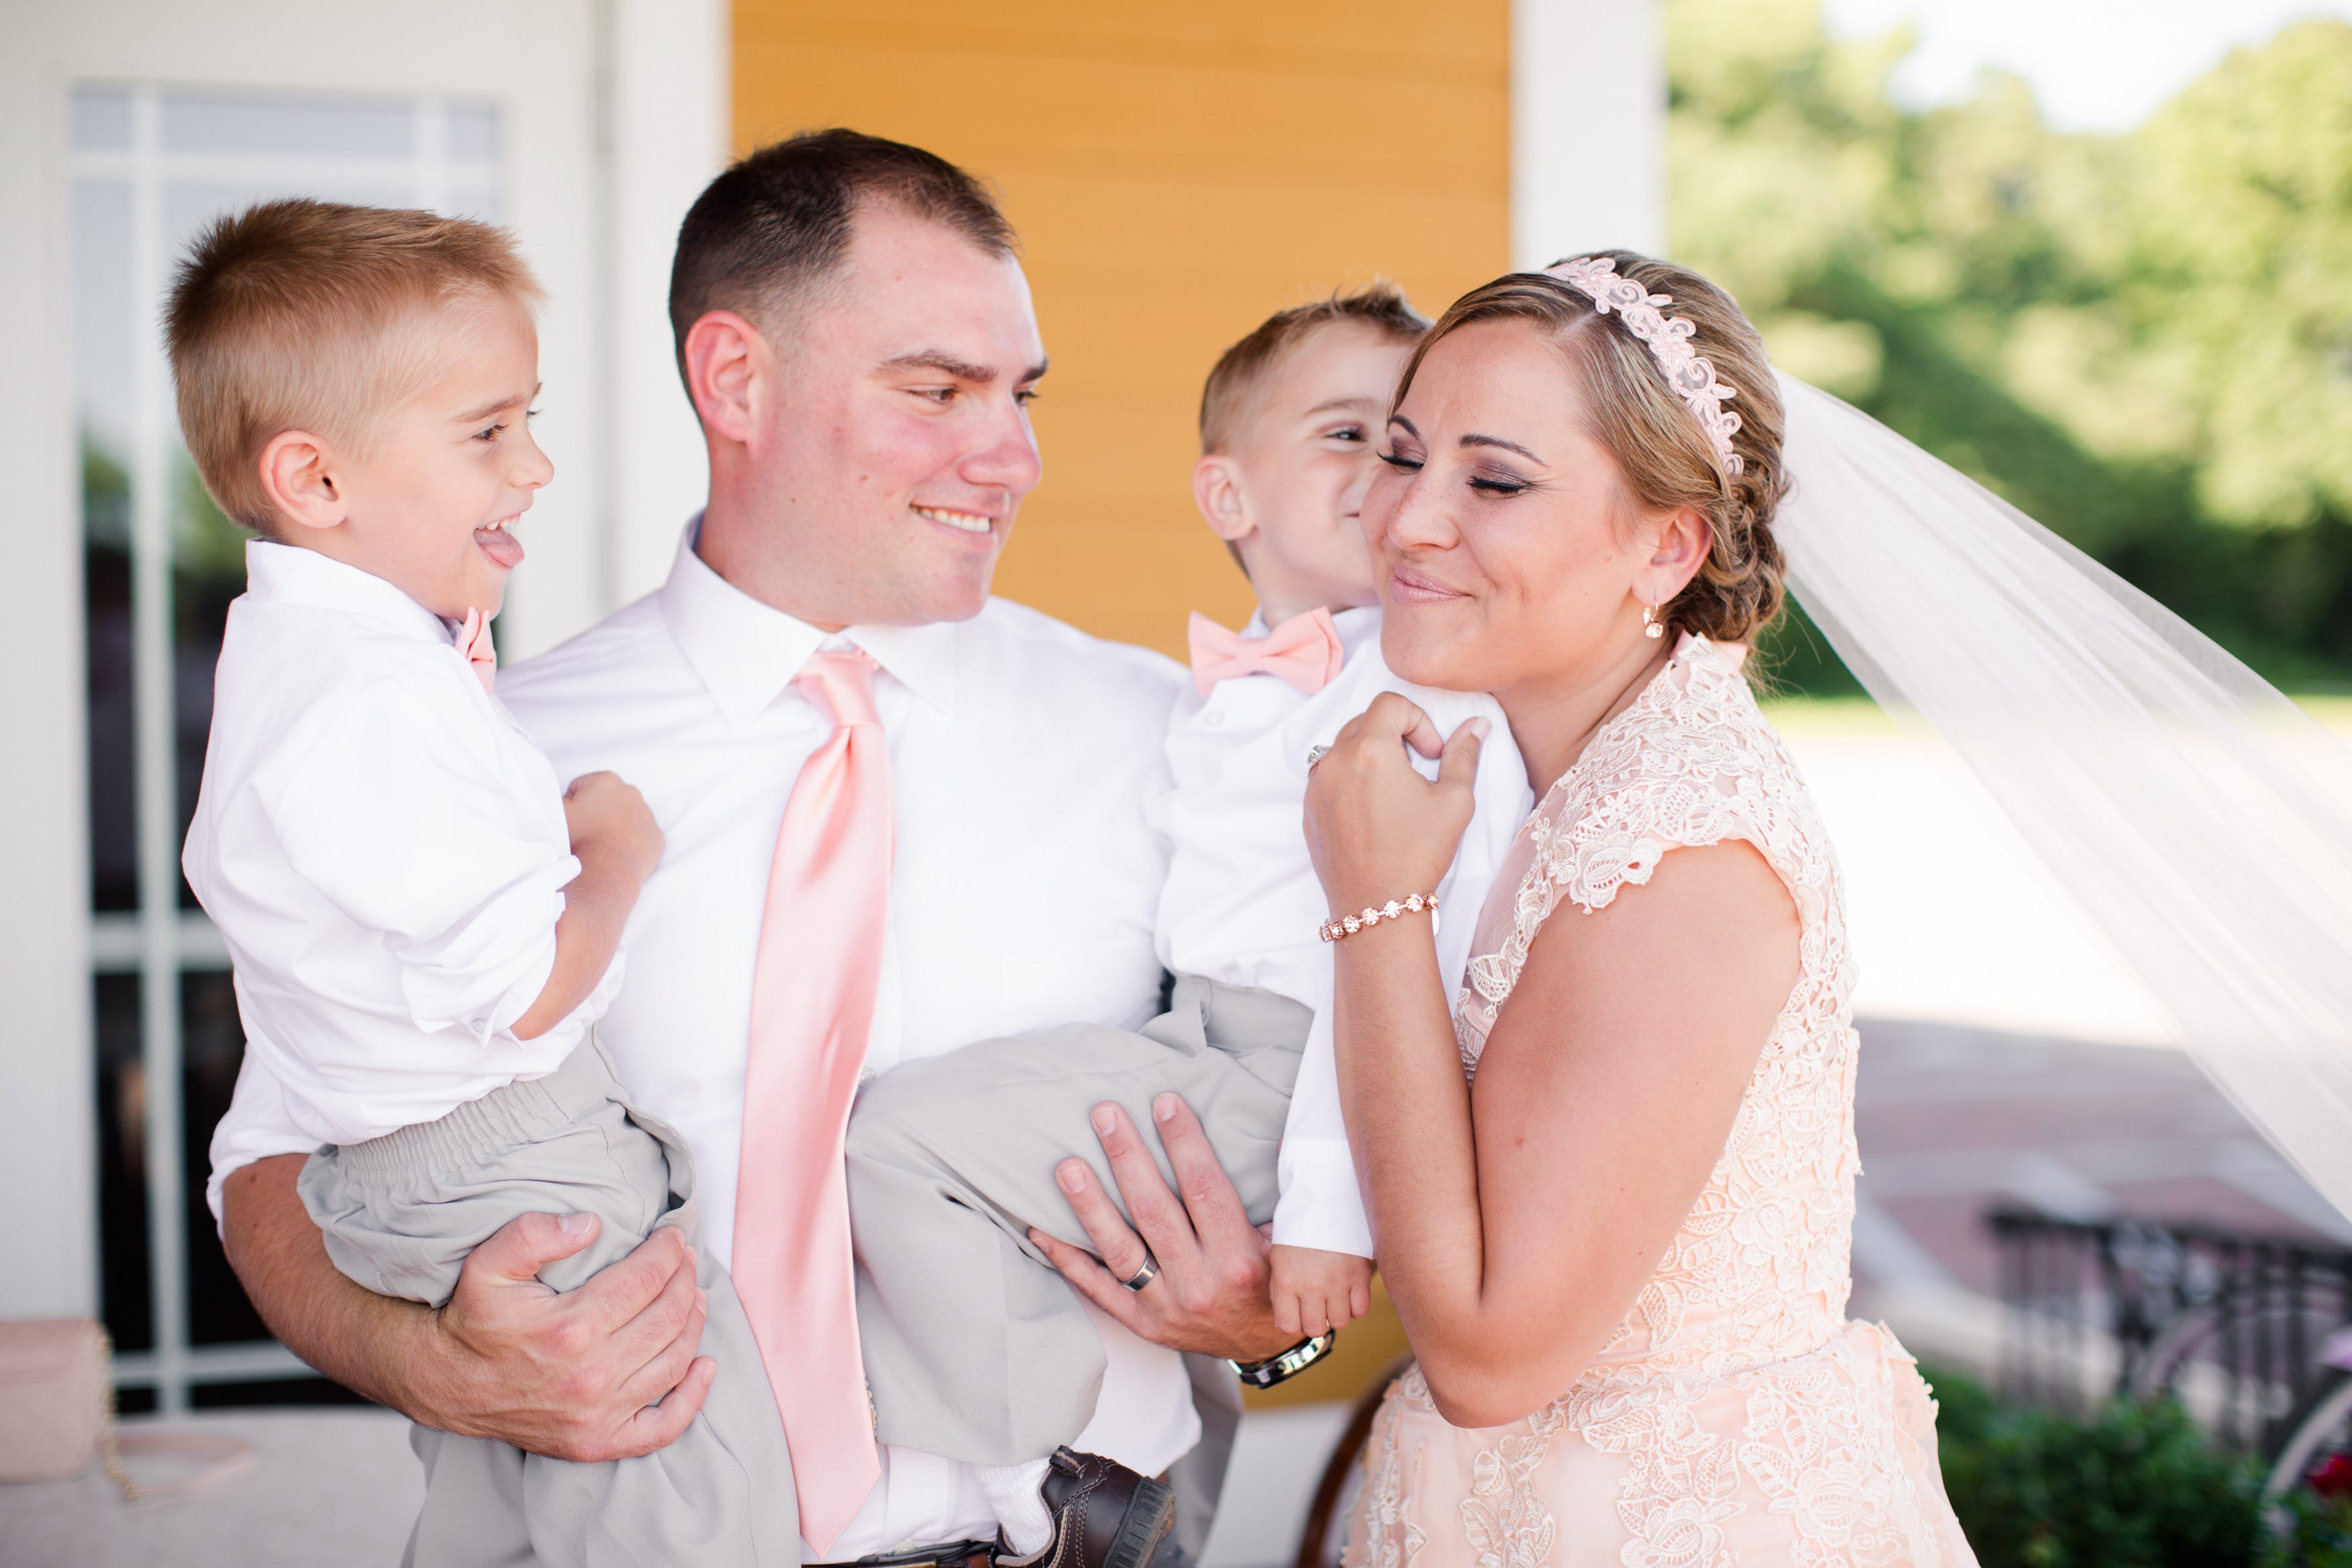 View More: http://katelynjames.pass.us/michael-and-kaitlin-wedding